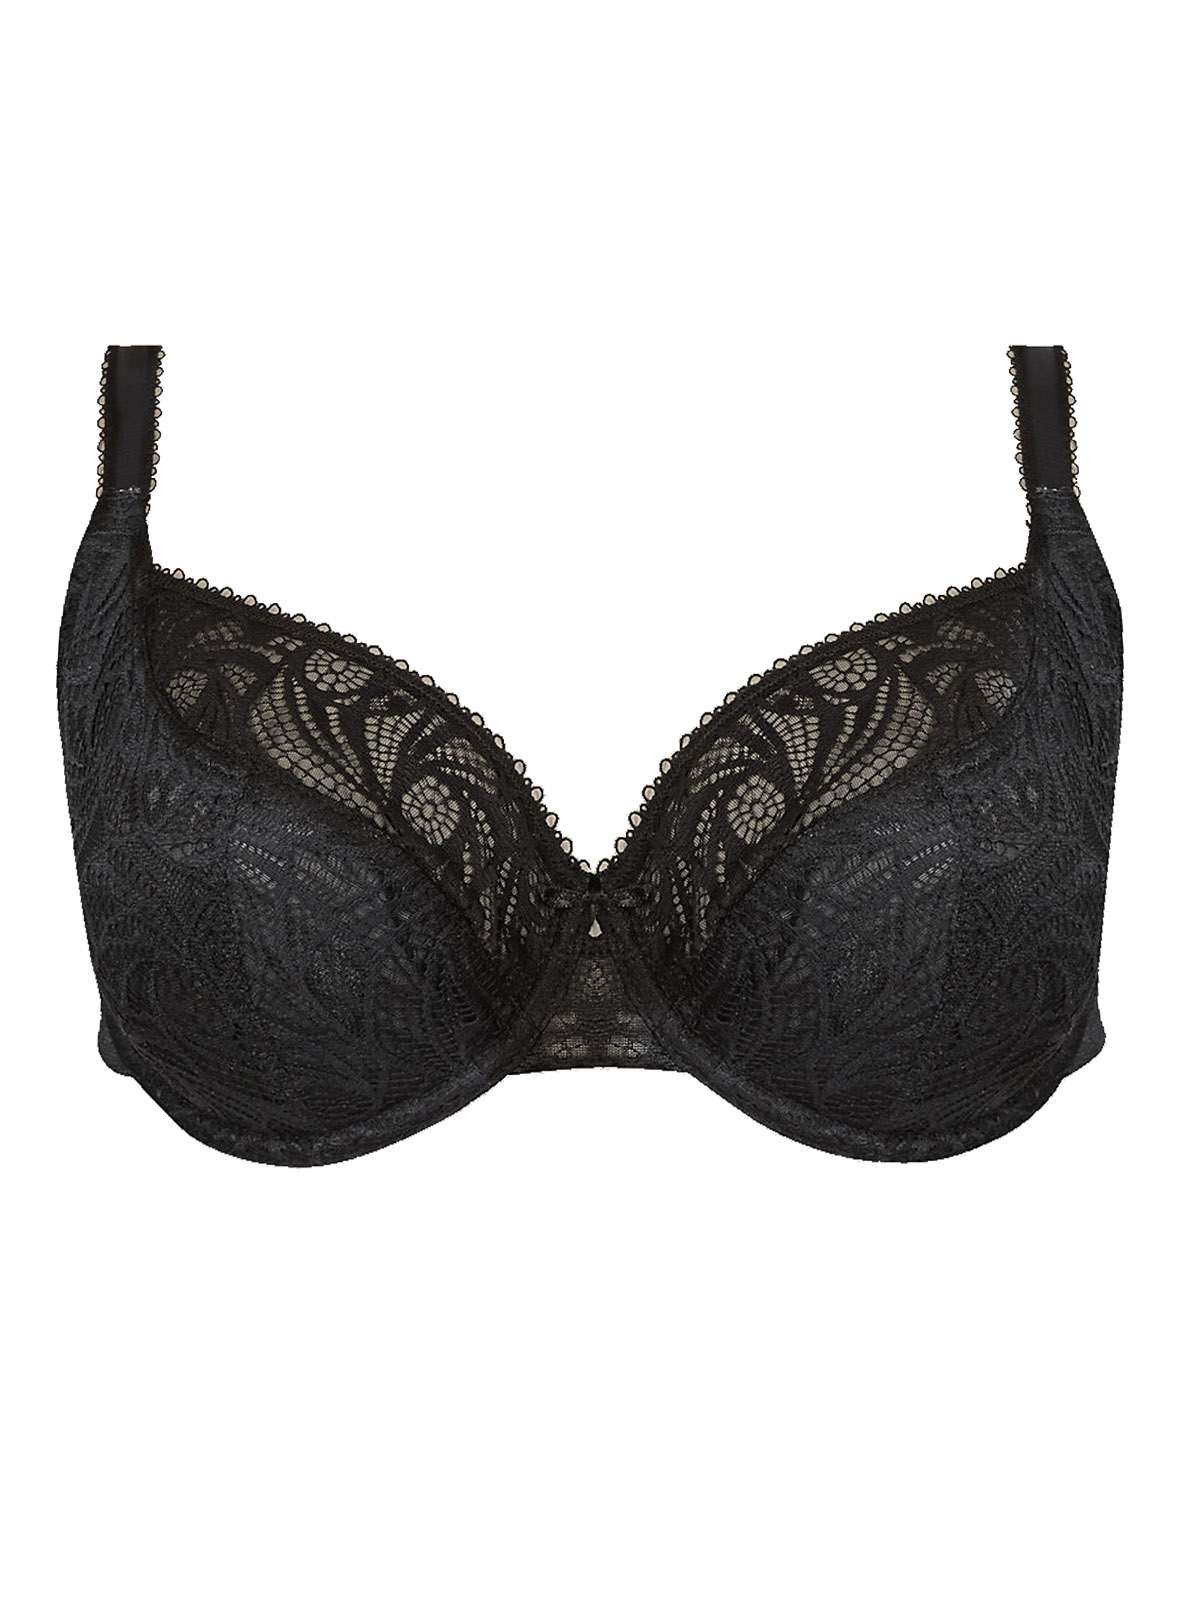 Marks and Spencer - - M&5 BLACK Floral Lace Non-Padded Full Cup Bra ...